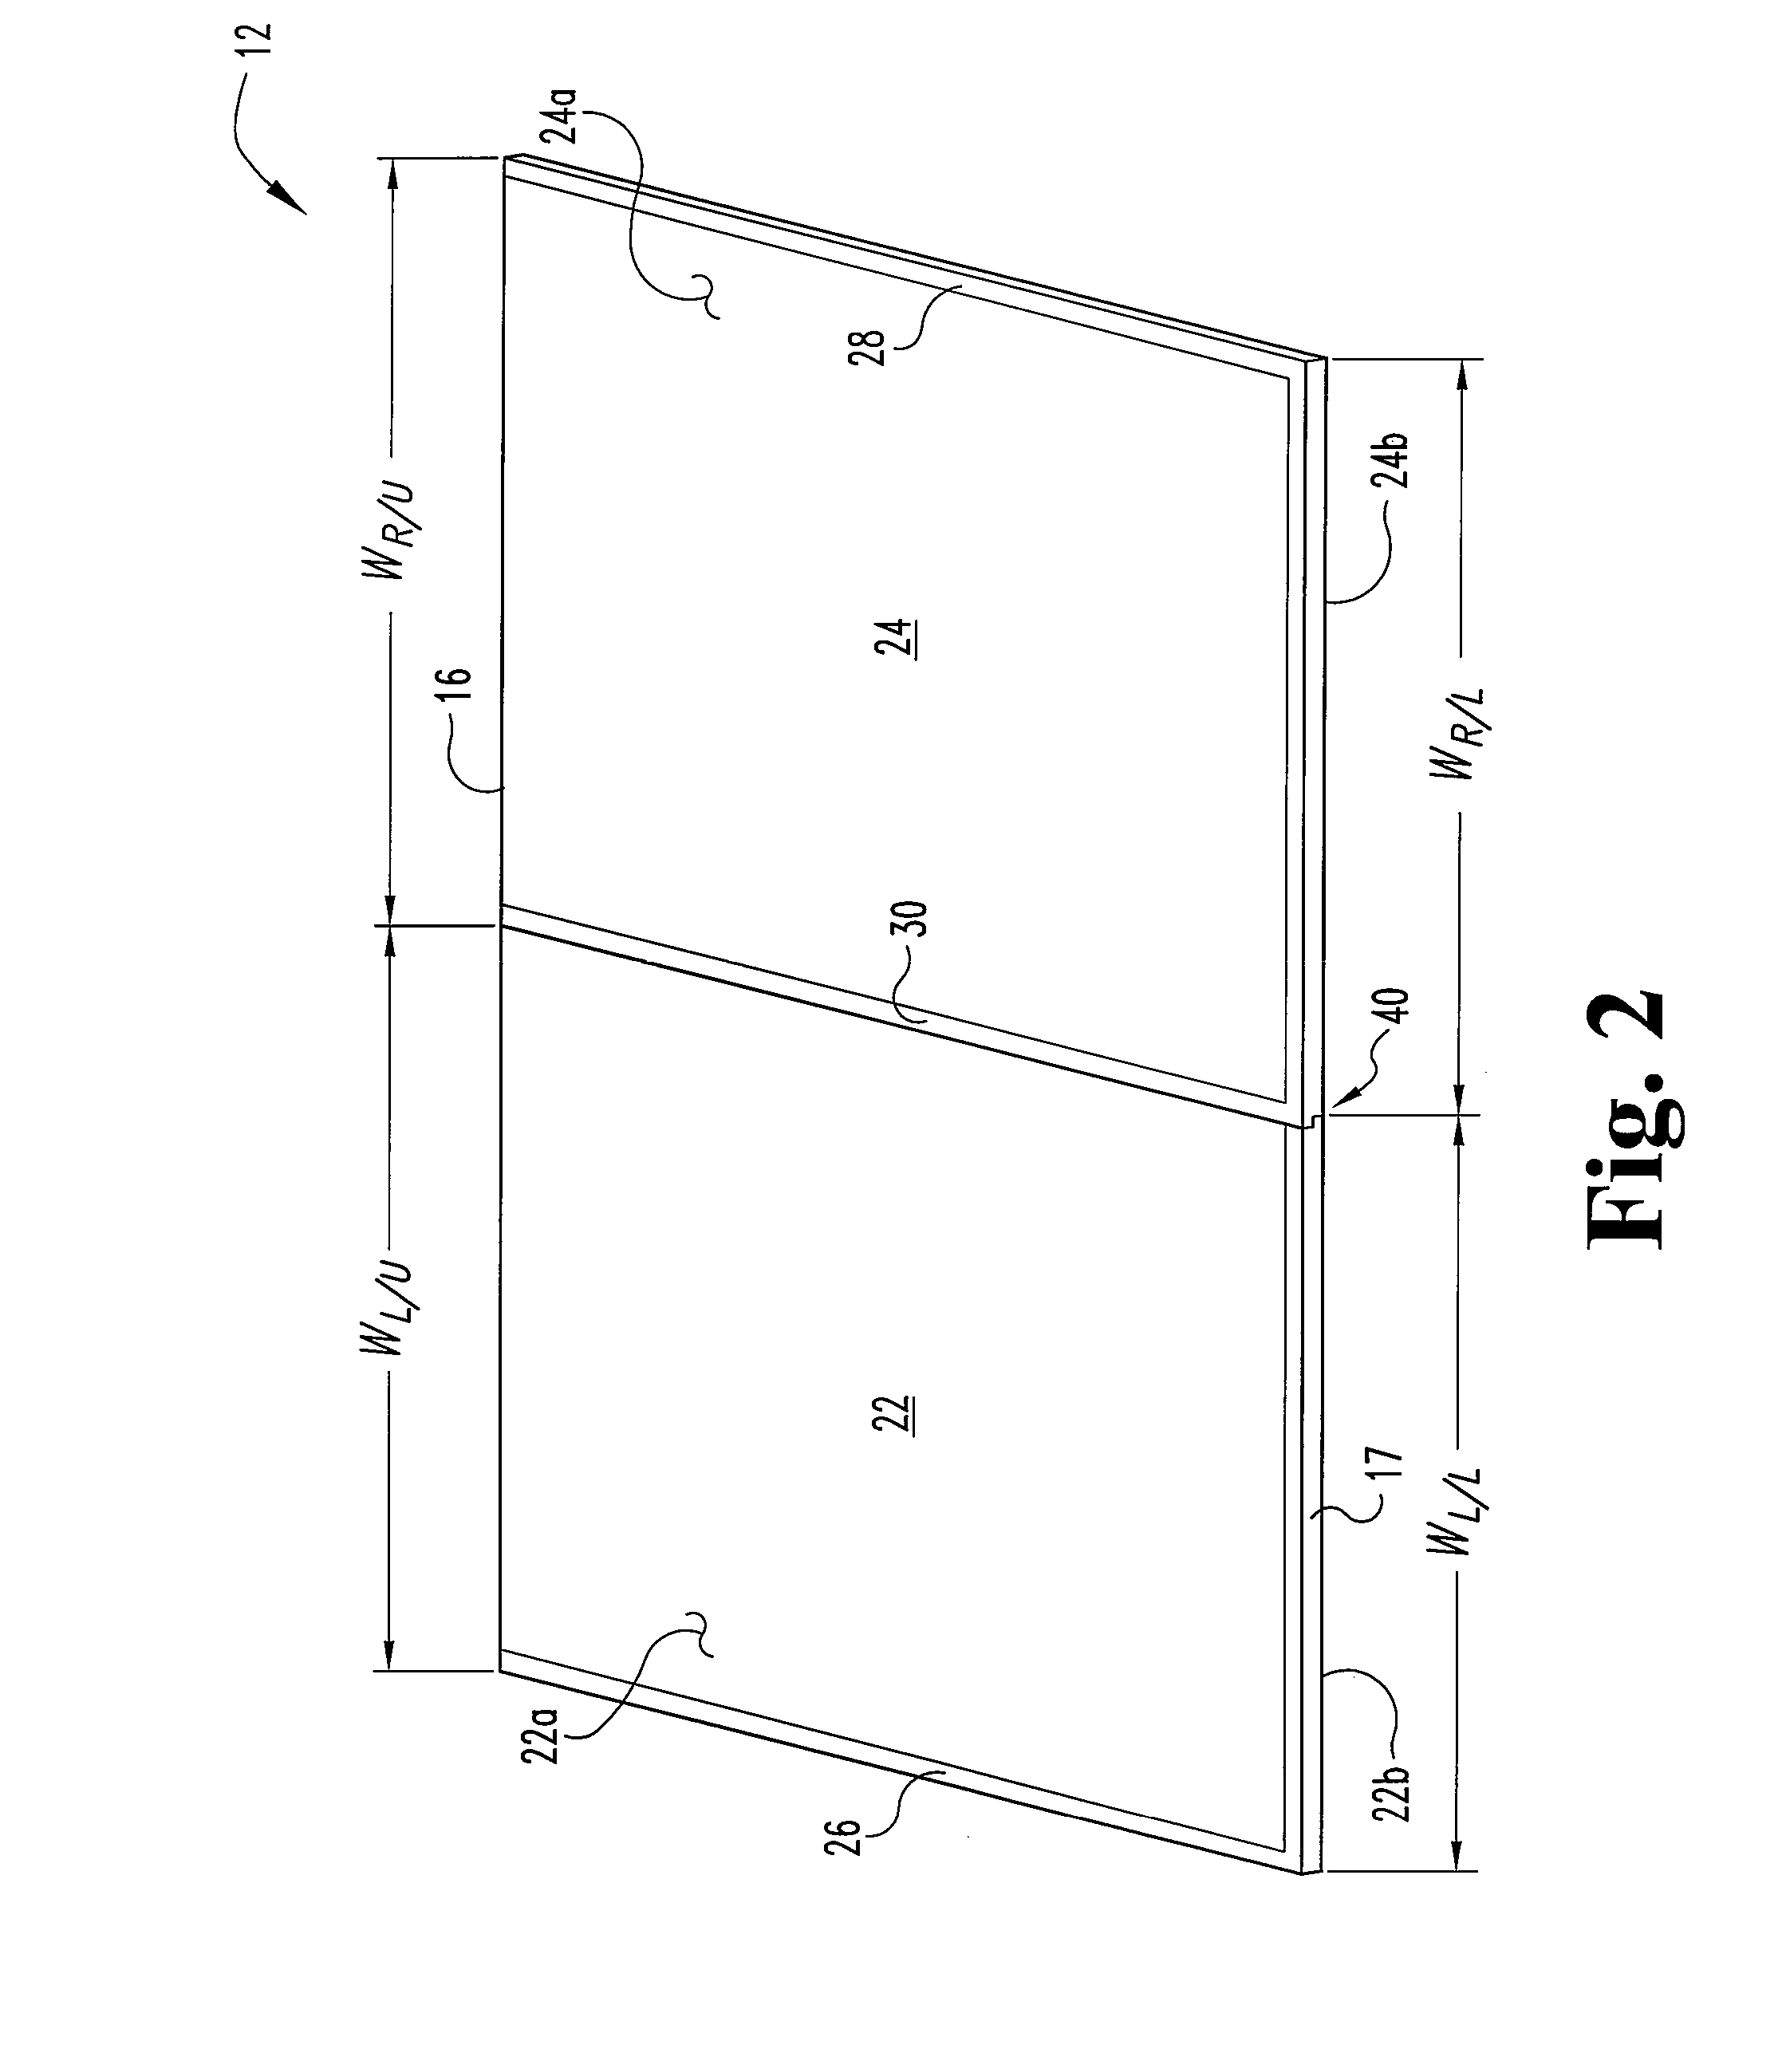 Four piece table tennis table having a stabilized joint